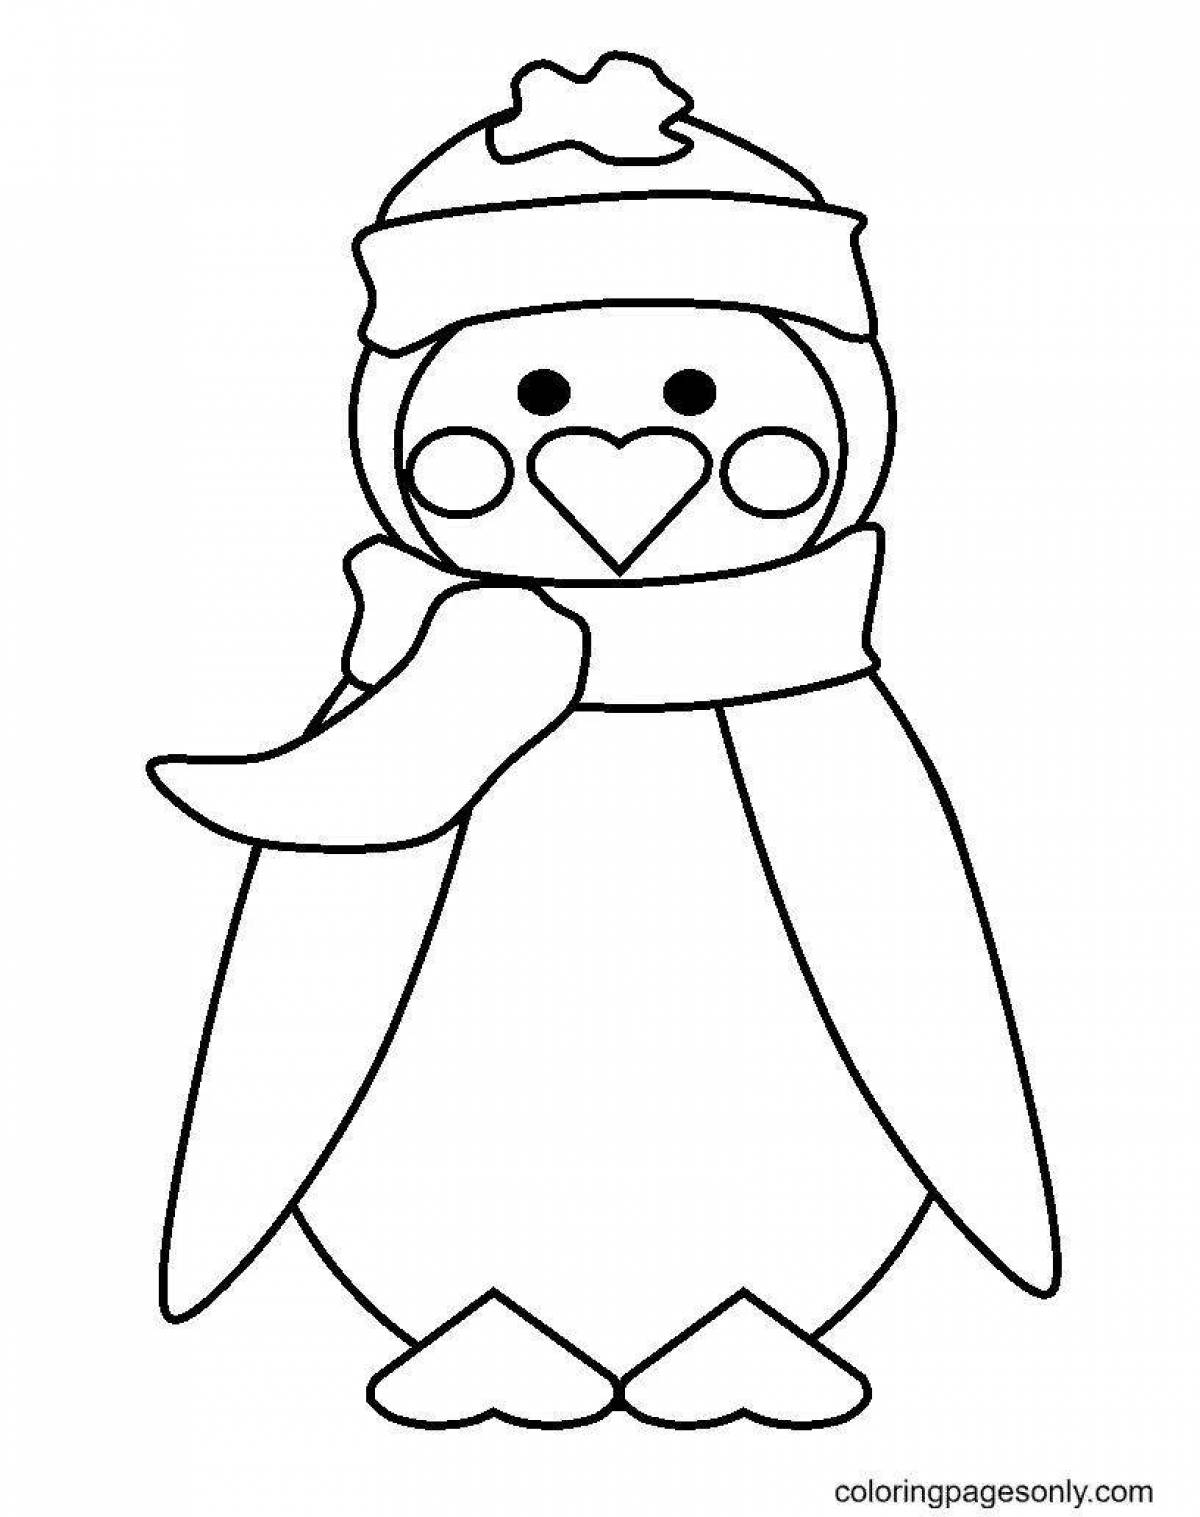 Coloring penguin with a colorful pattern